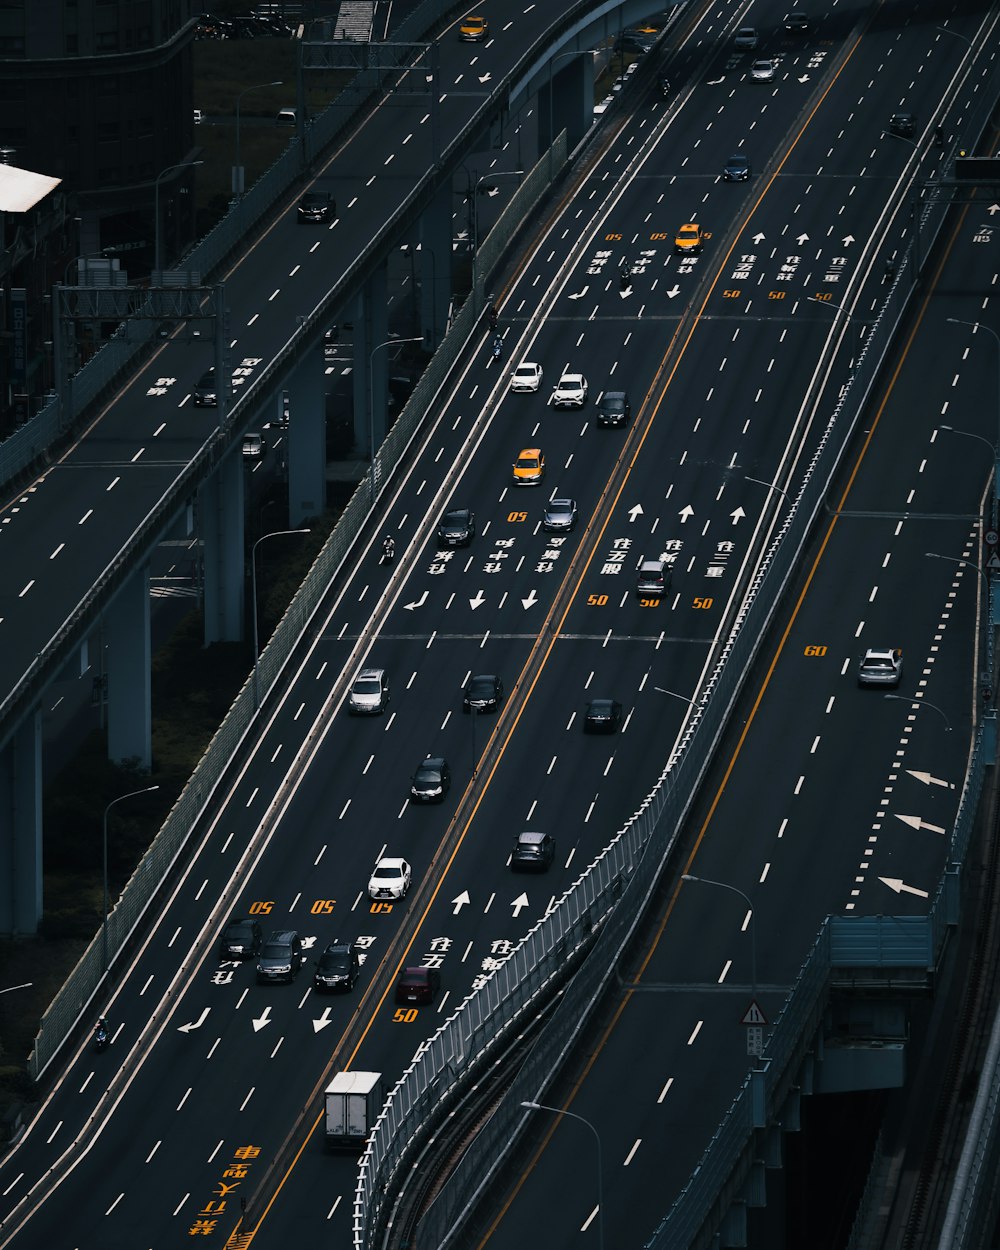 cars on road during daytime